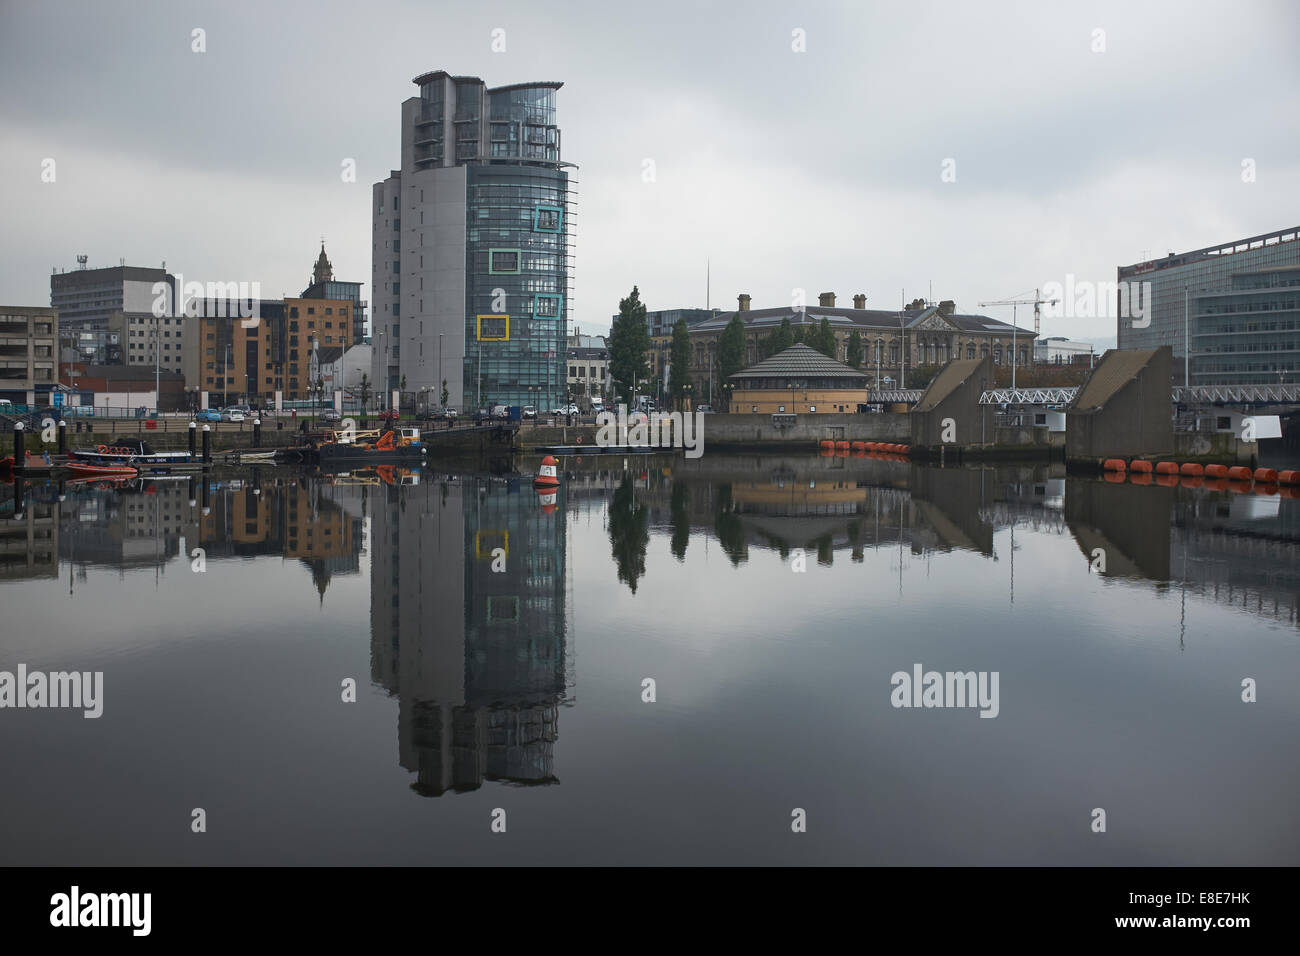 The Boat development of apartments overlooking the River Lagan in Belfast city centre Stock Photo